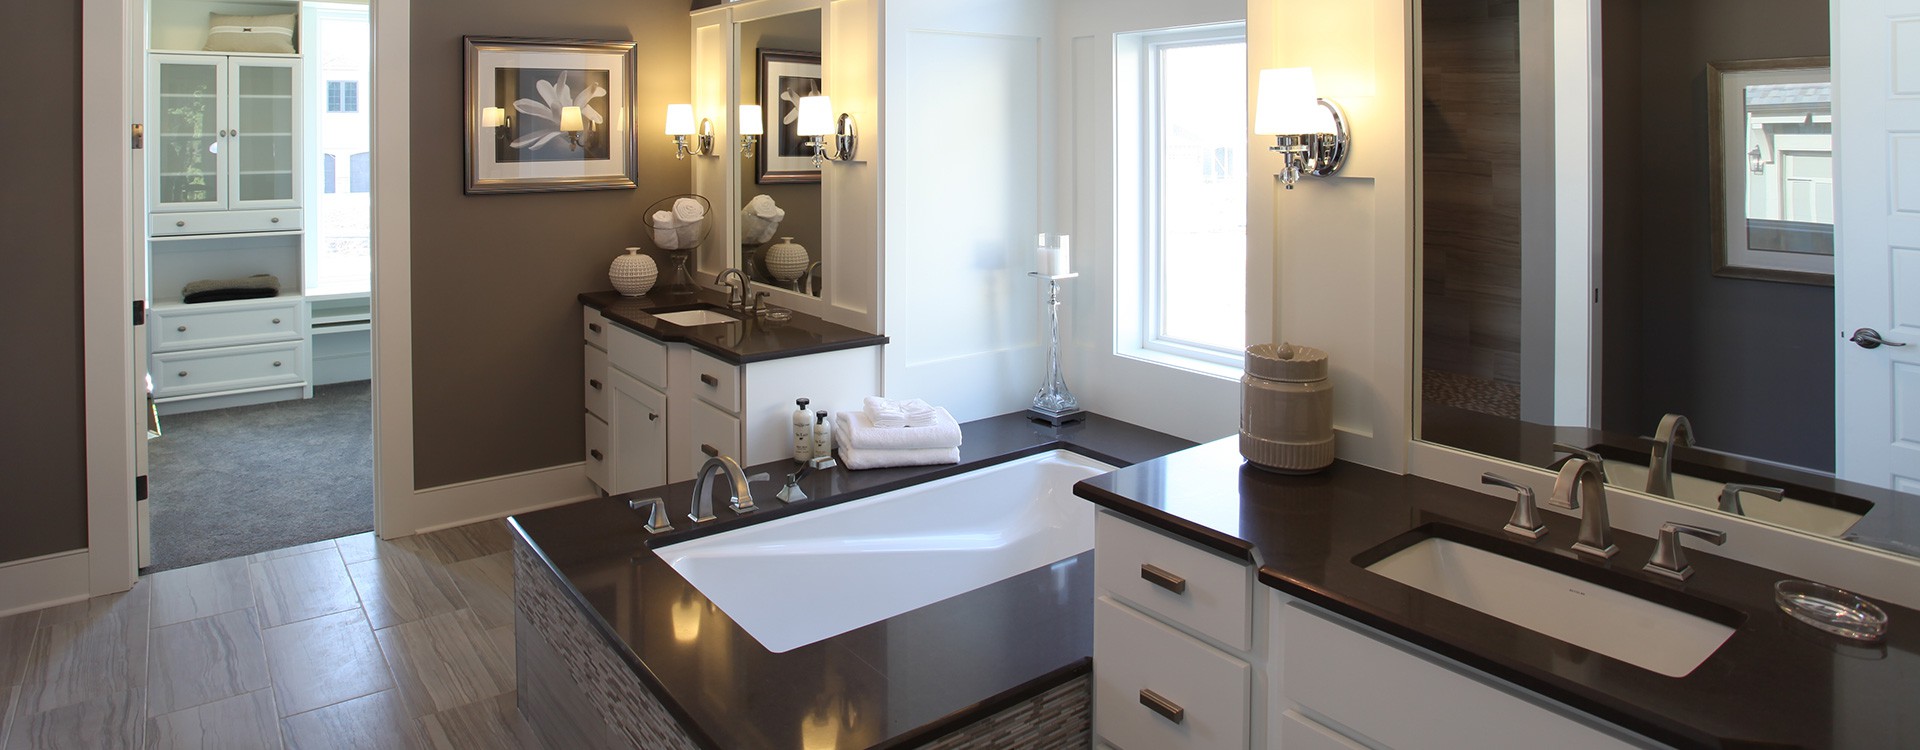 vanities_divided_by_tub